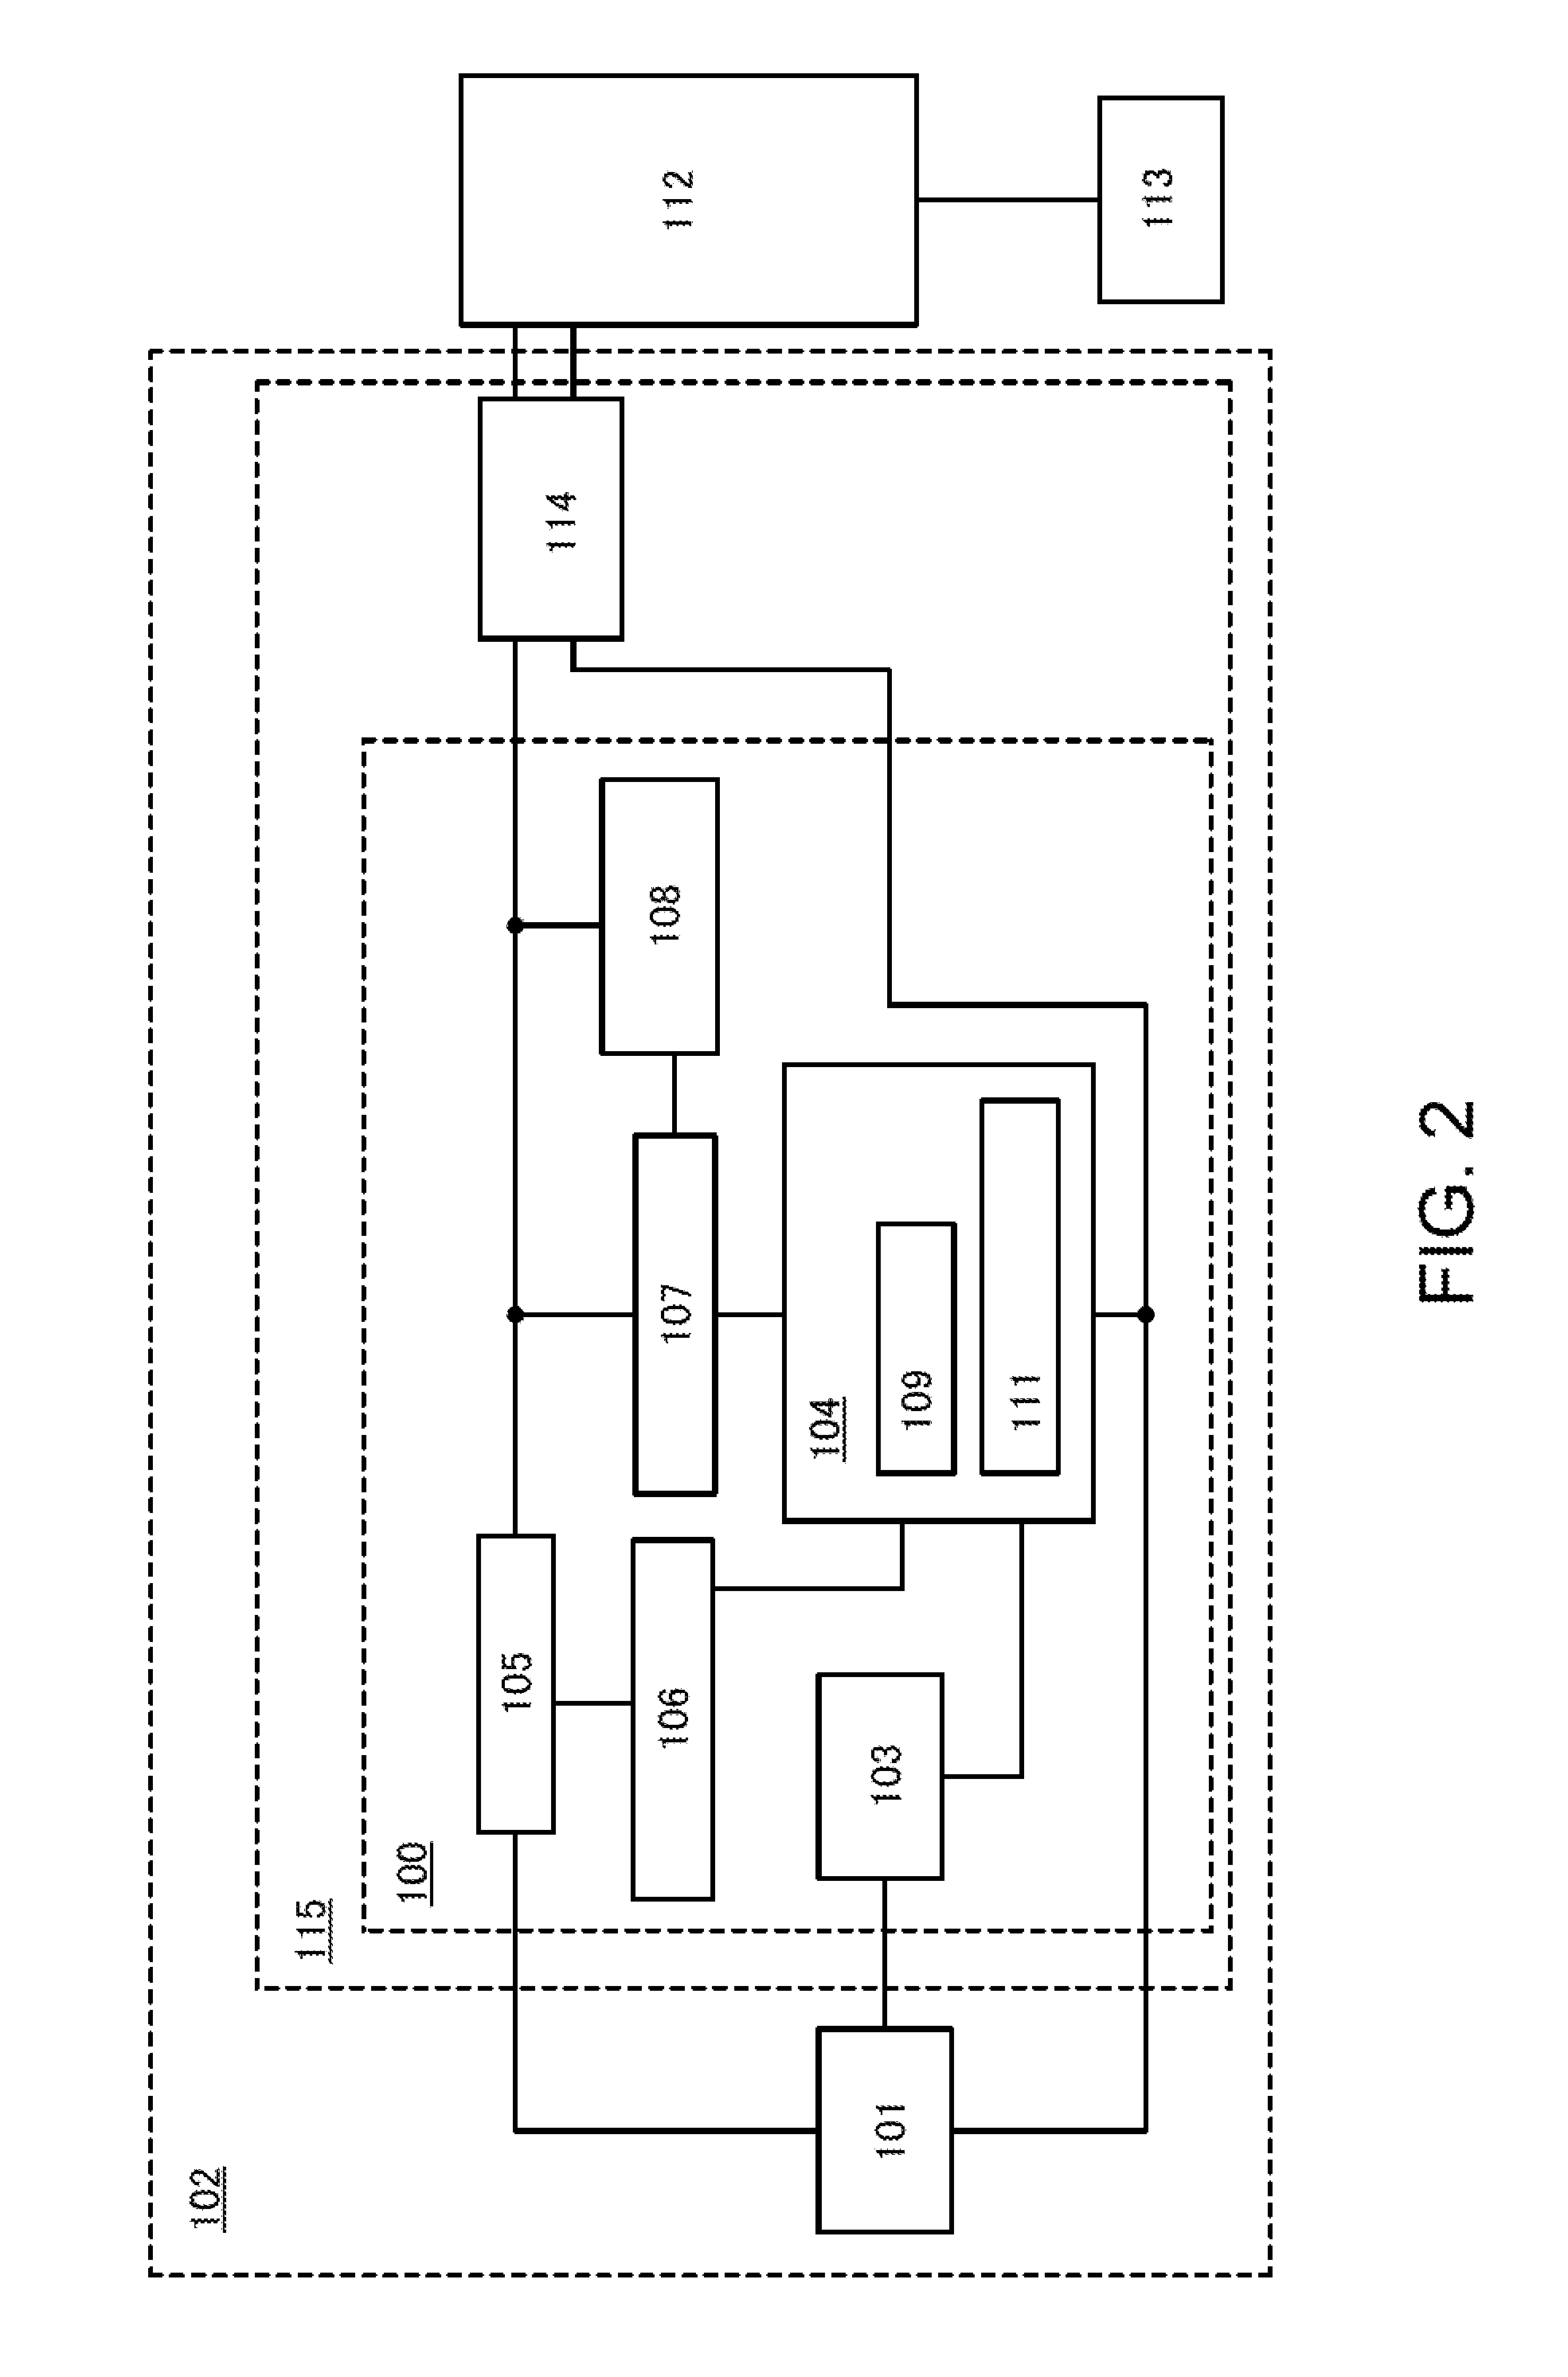 Protective circuit, battery charger, and power storage device